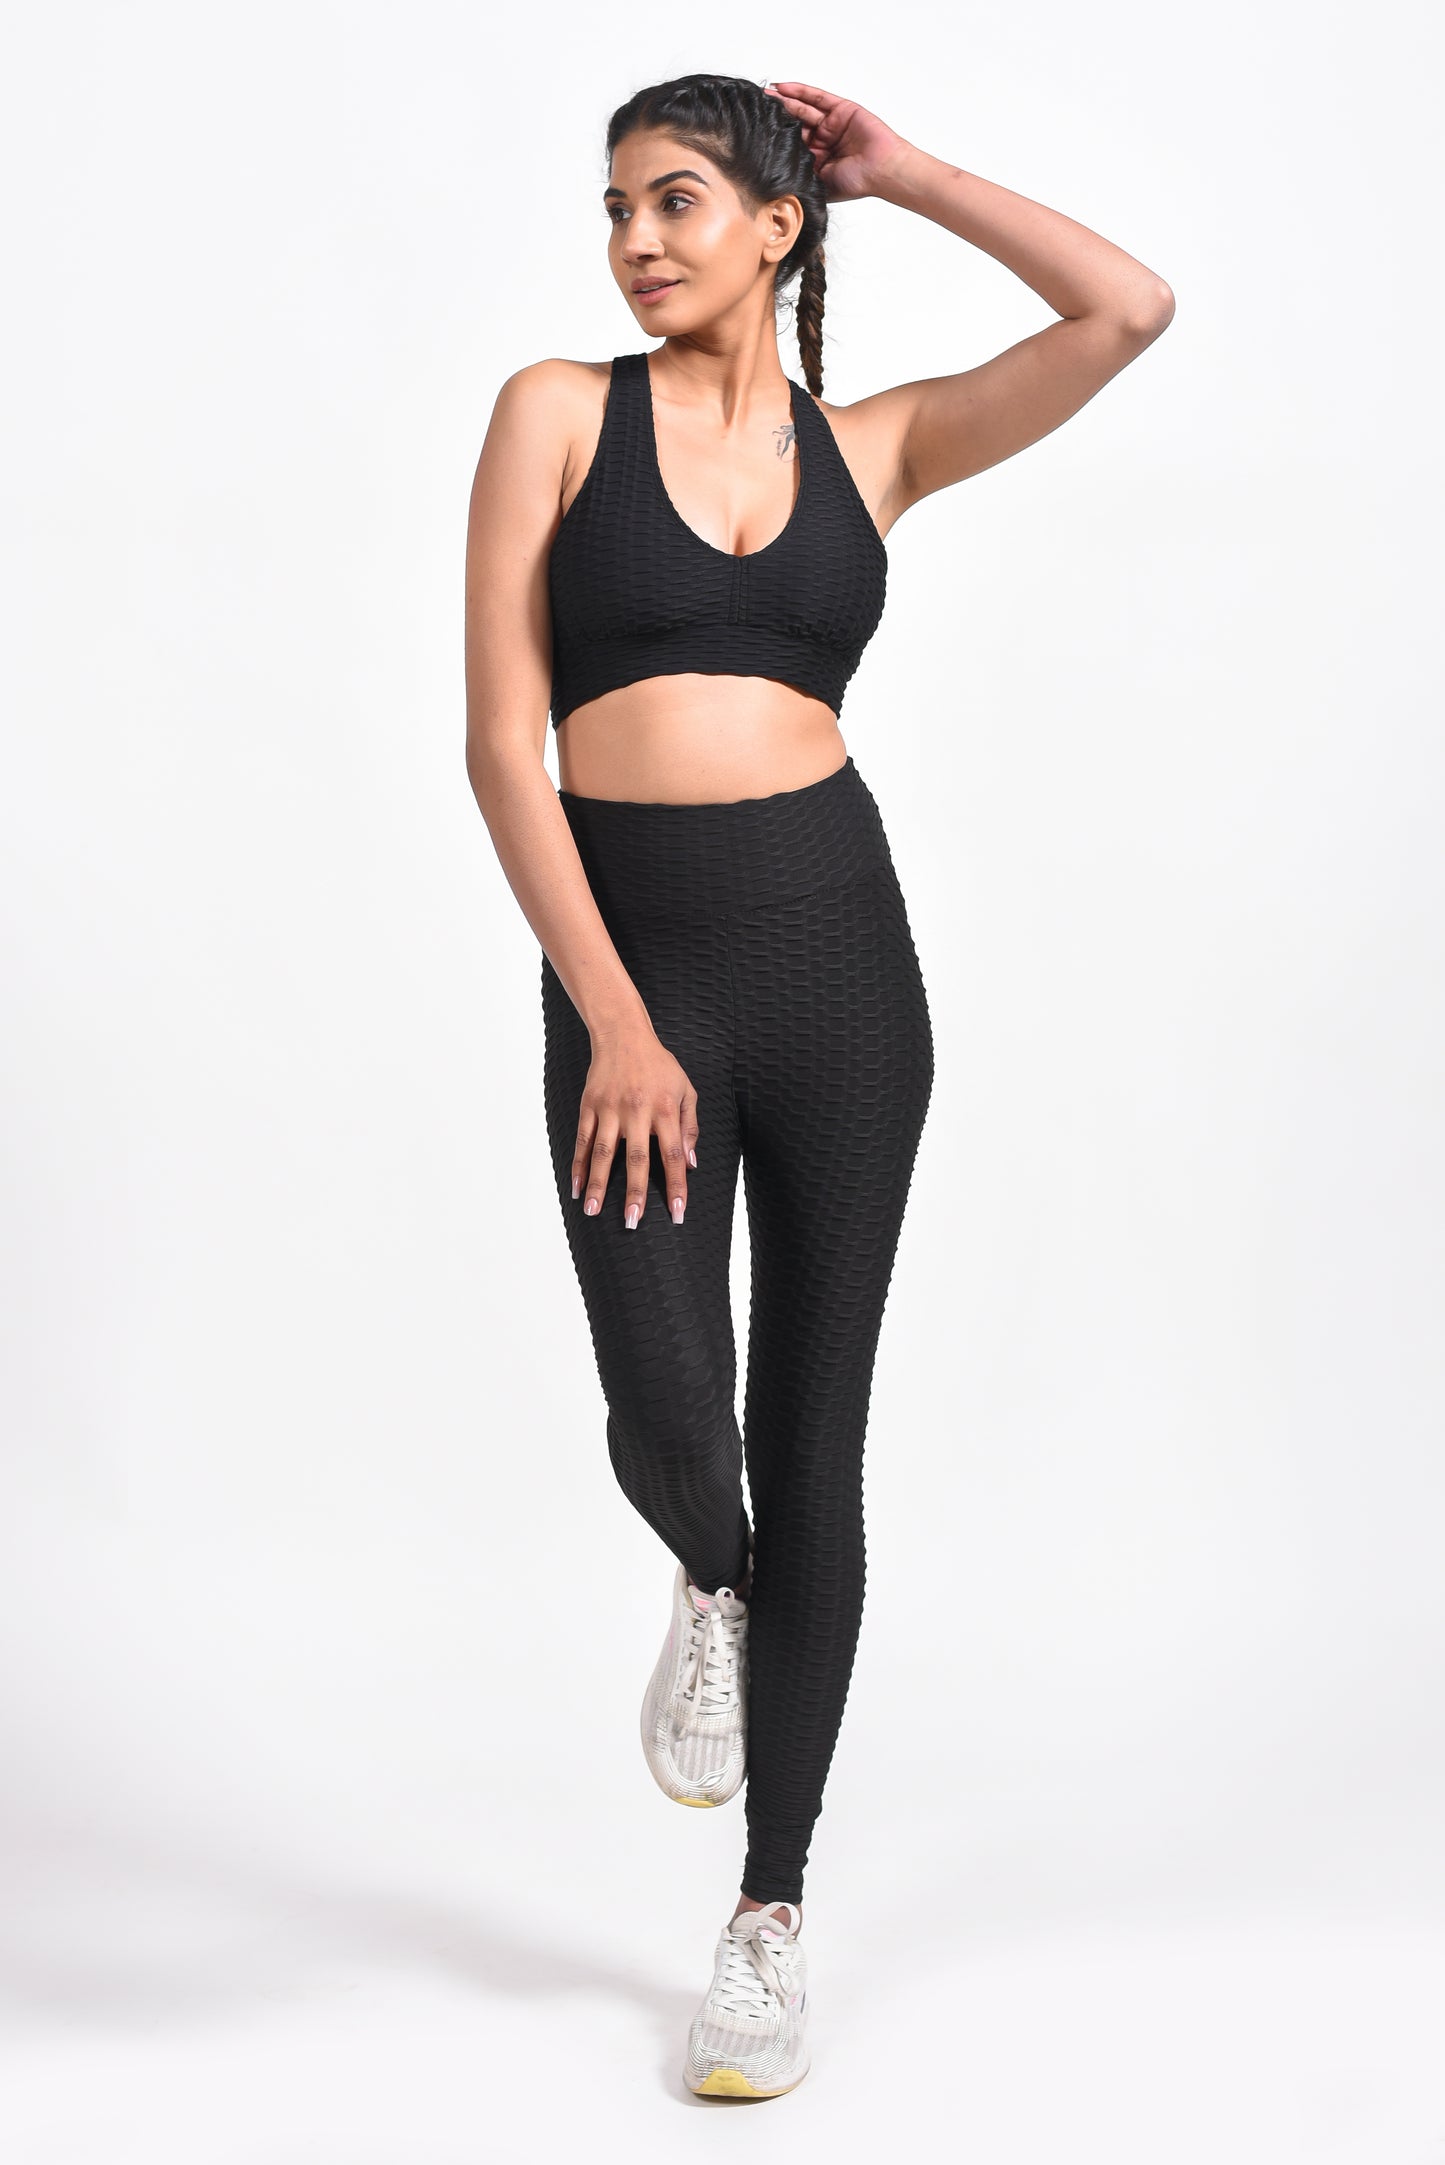 Gymsquad  Buy Black Push Up Leggings at Best Discount Online